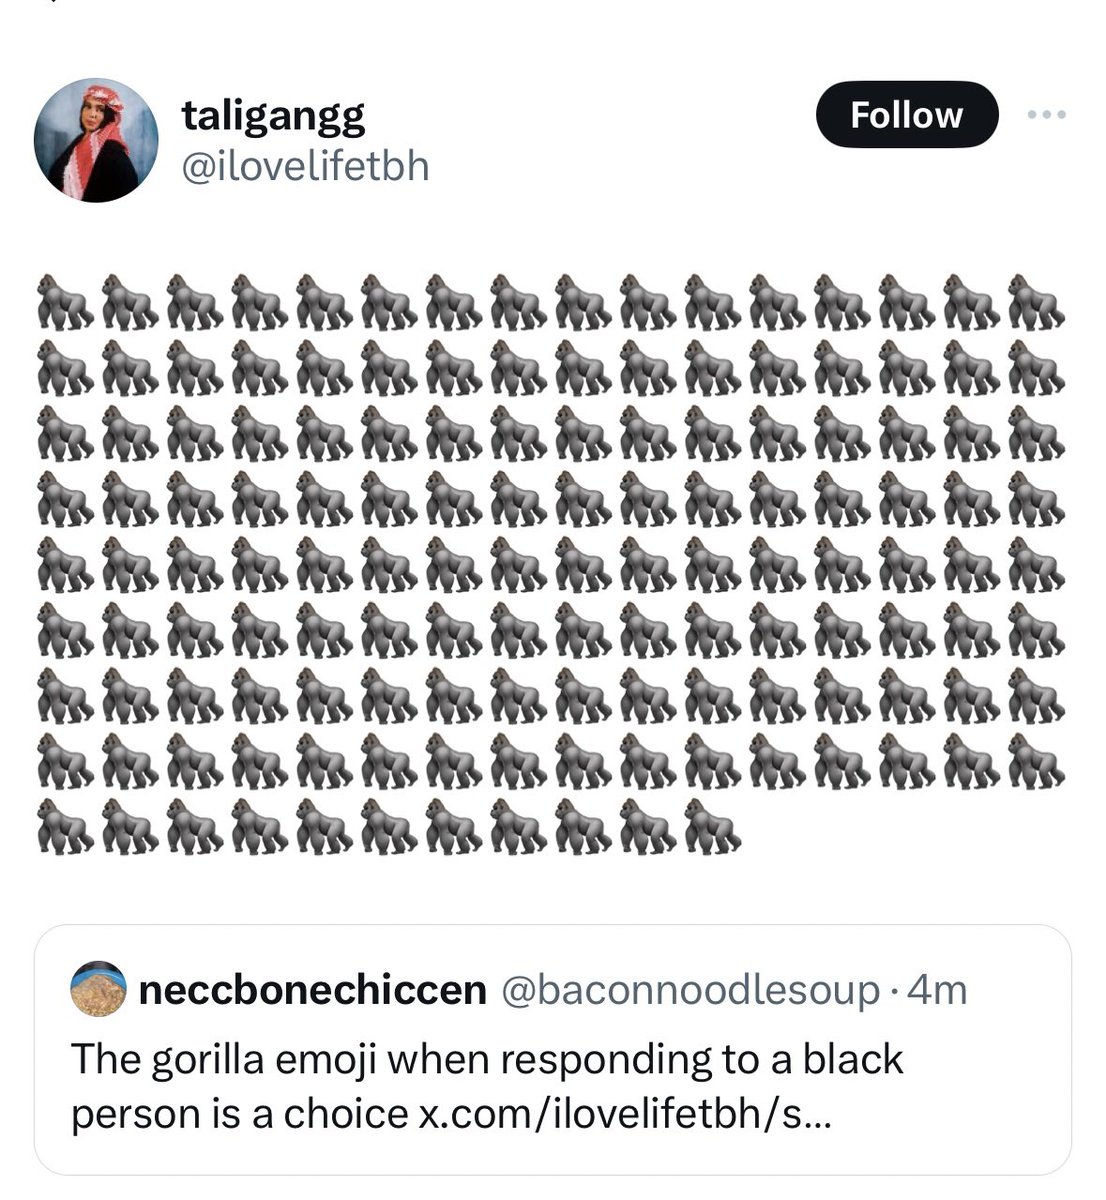 You don’t think tagging me a black person with gorillas and other visibly black ppl on their profiles raising their concerns with gorillas is not racist? That’s what you going with?